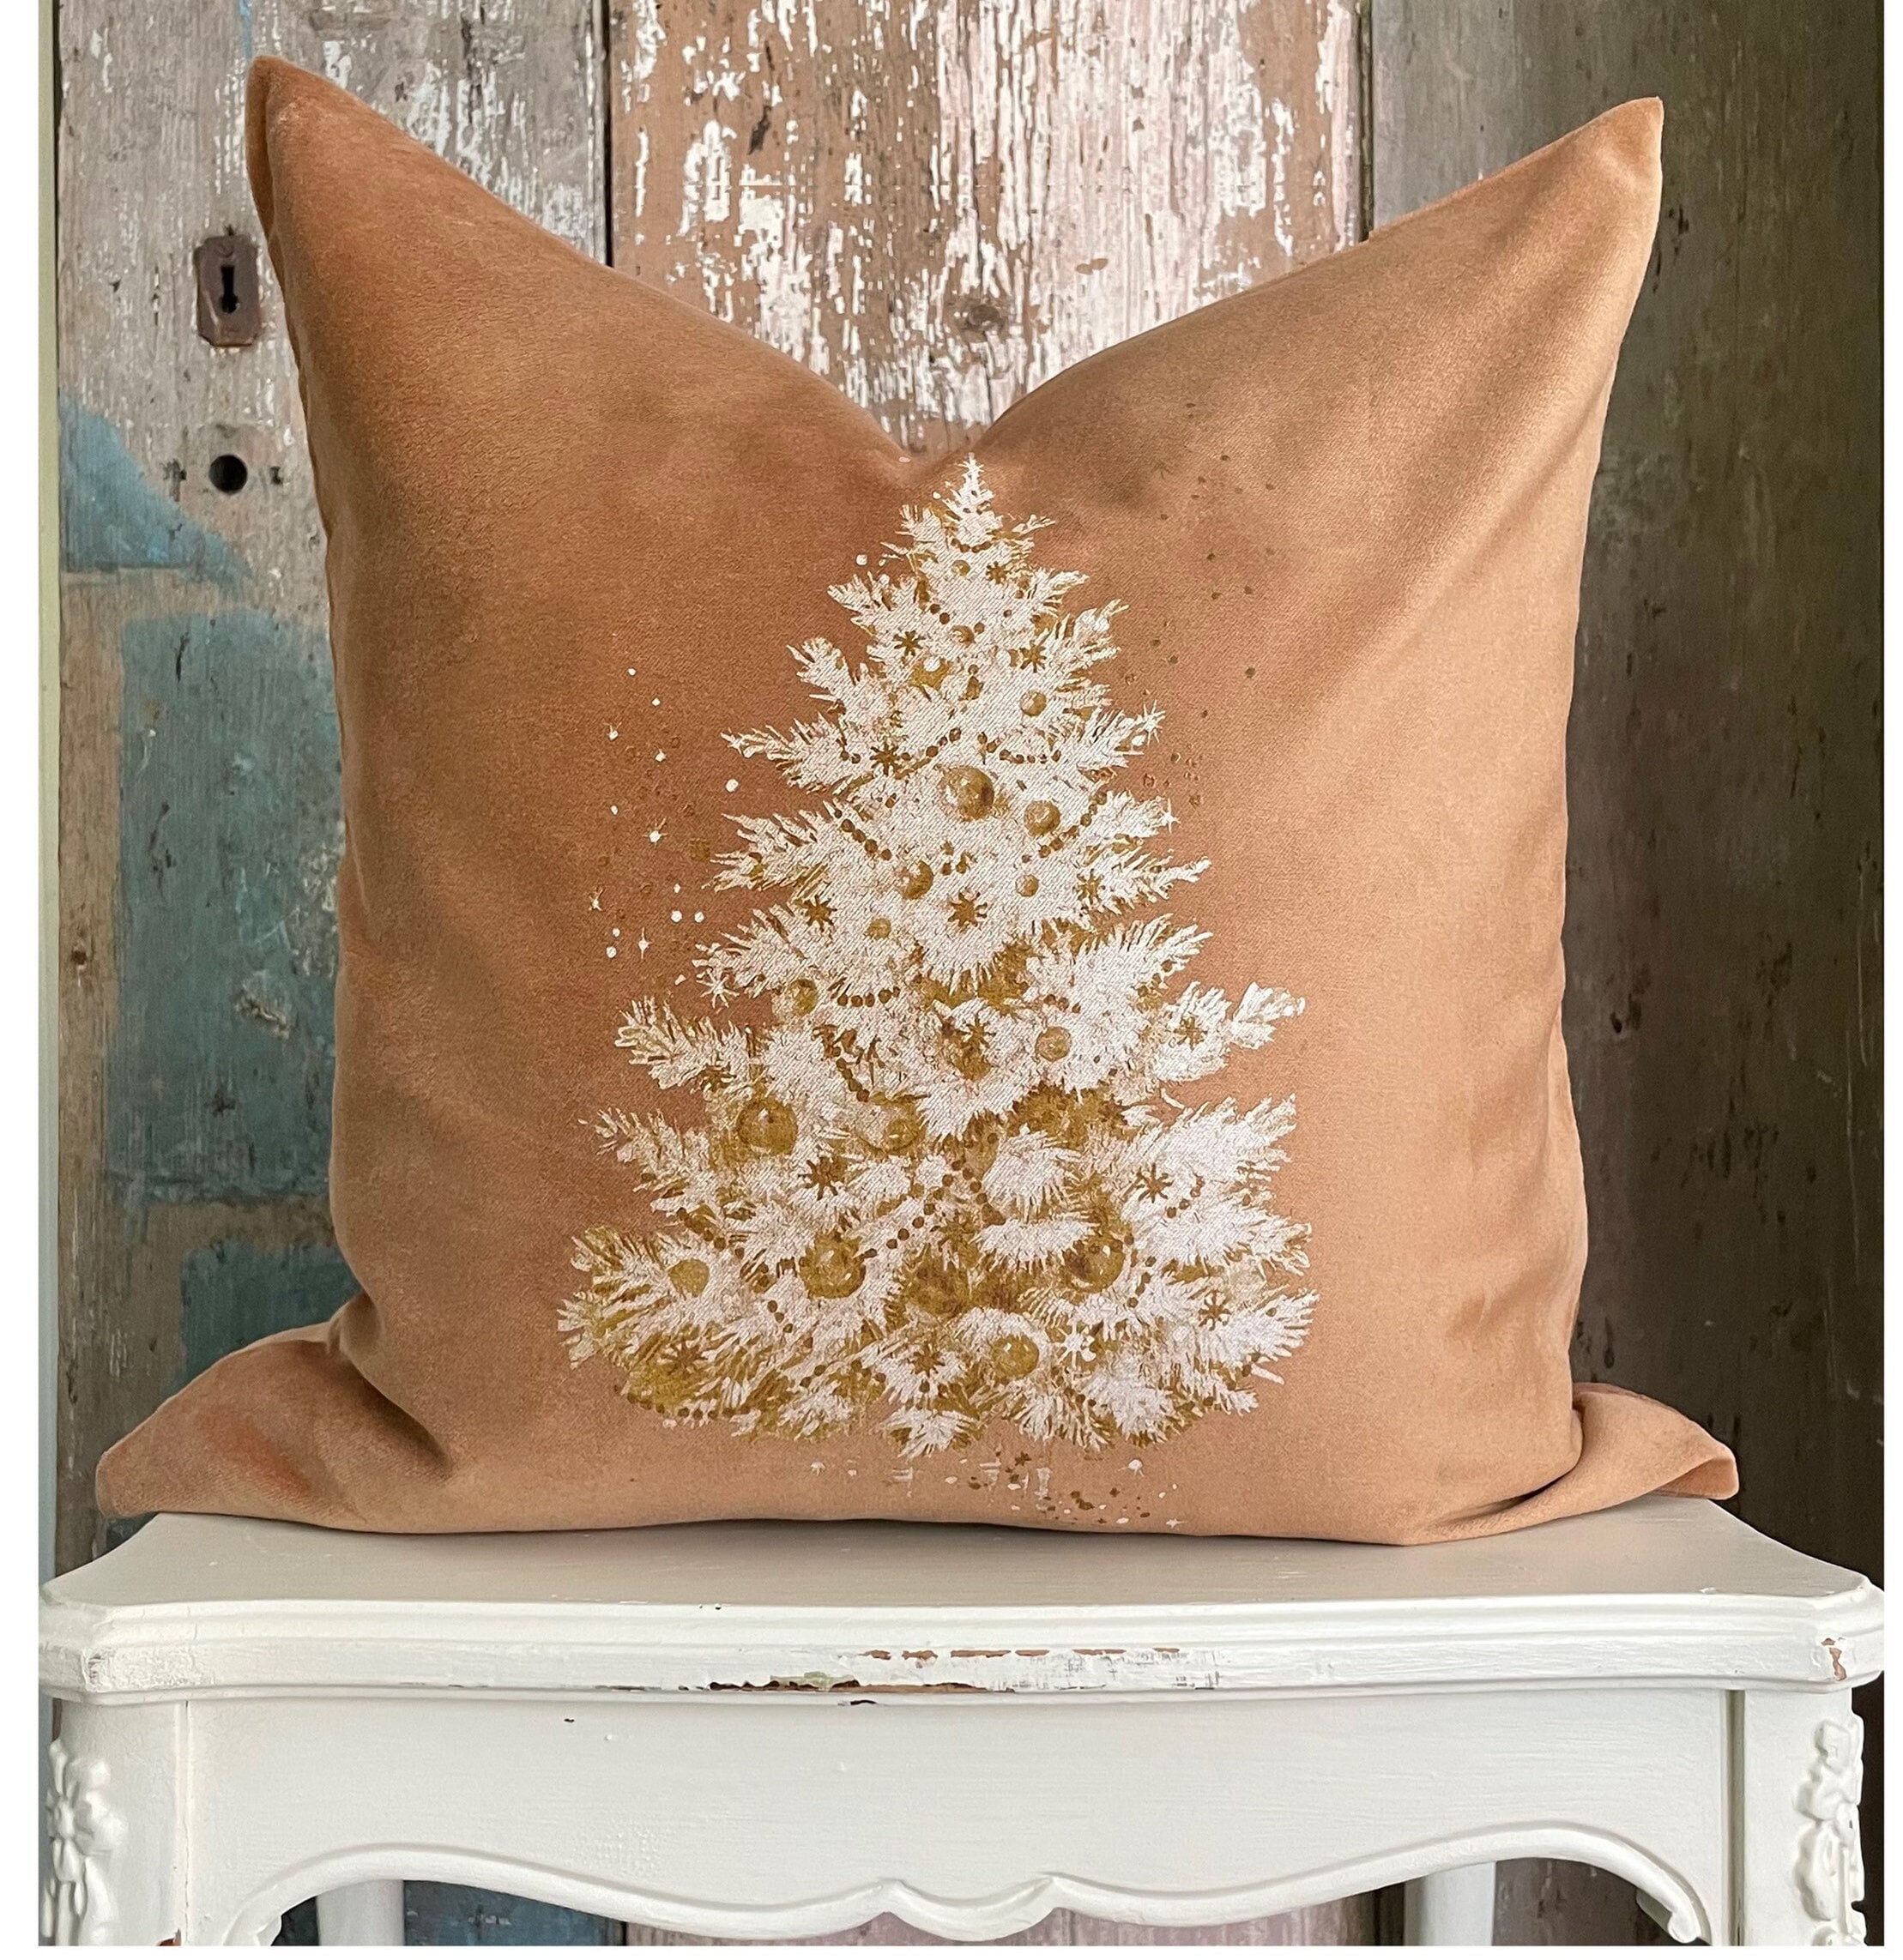 Lewondr Christmas Pillow Covers, 12x20 inch 1Pcs Soft Cute Pellet Velvet Embroidery Trees Brown White Decorative Lumbar Pillow Cover with Tassel